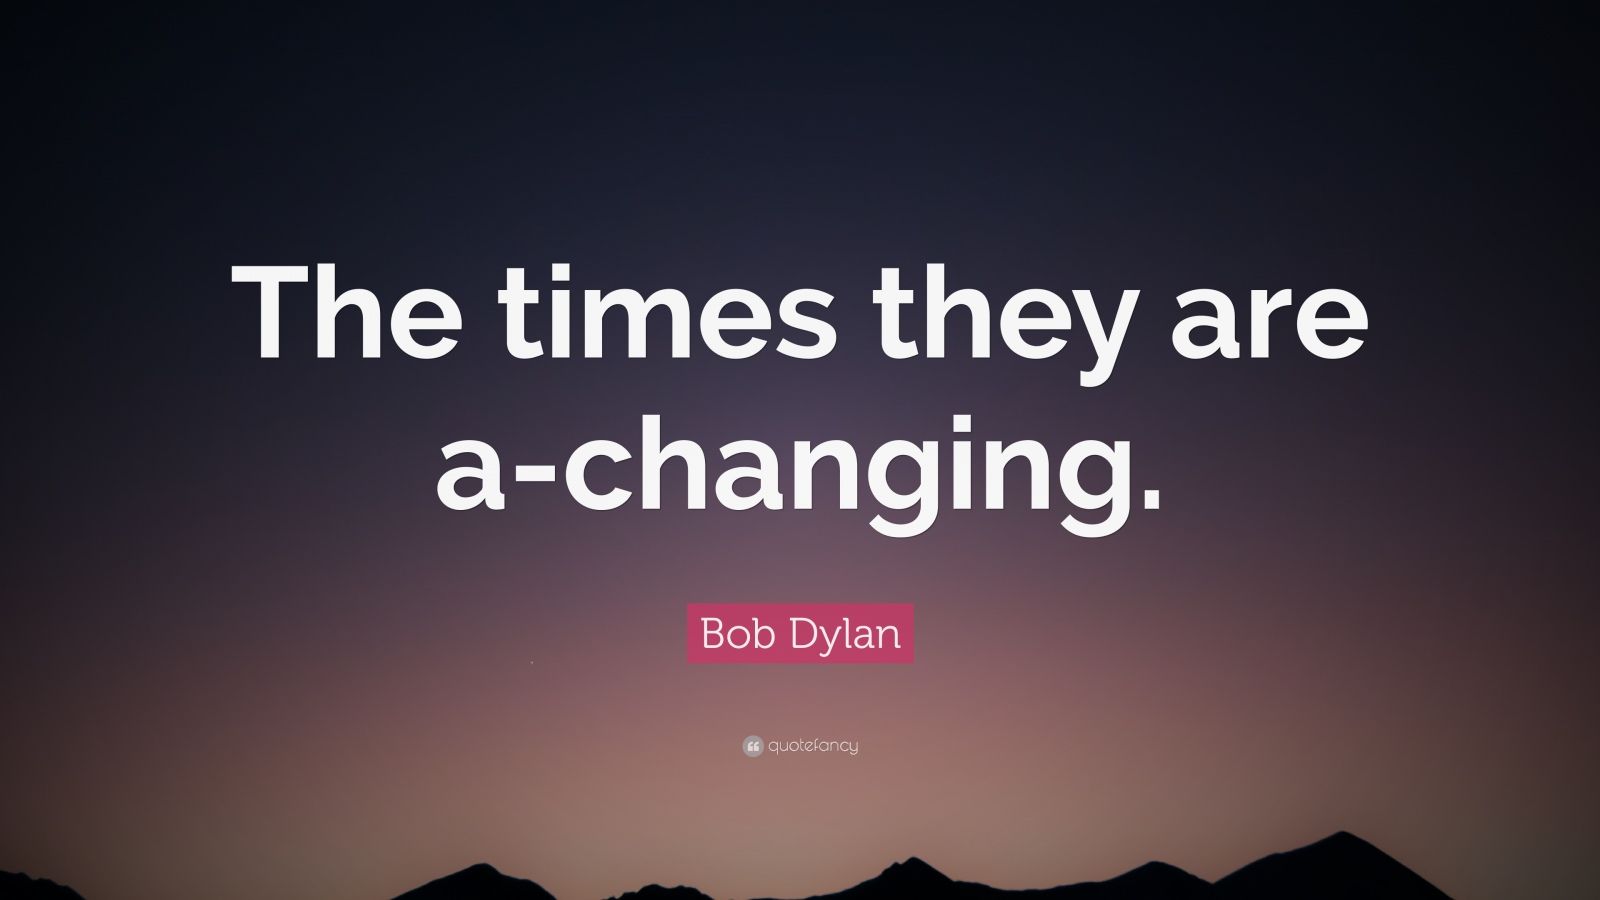 1727234 Bob Dylan Quote The times they are a changing